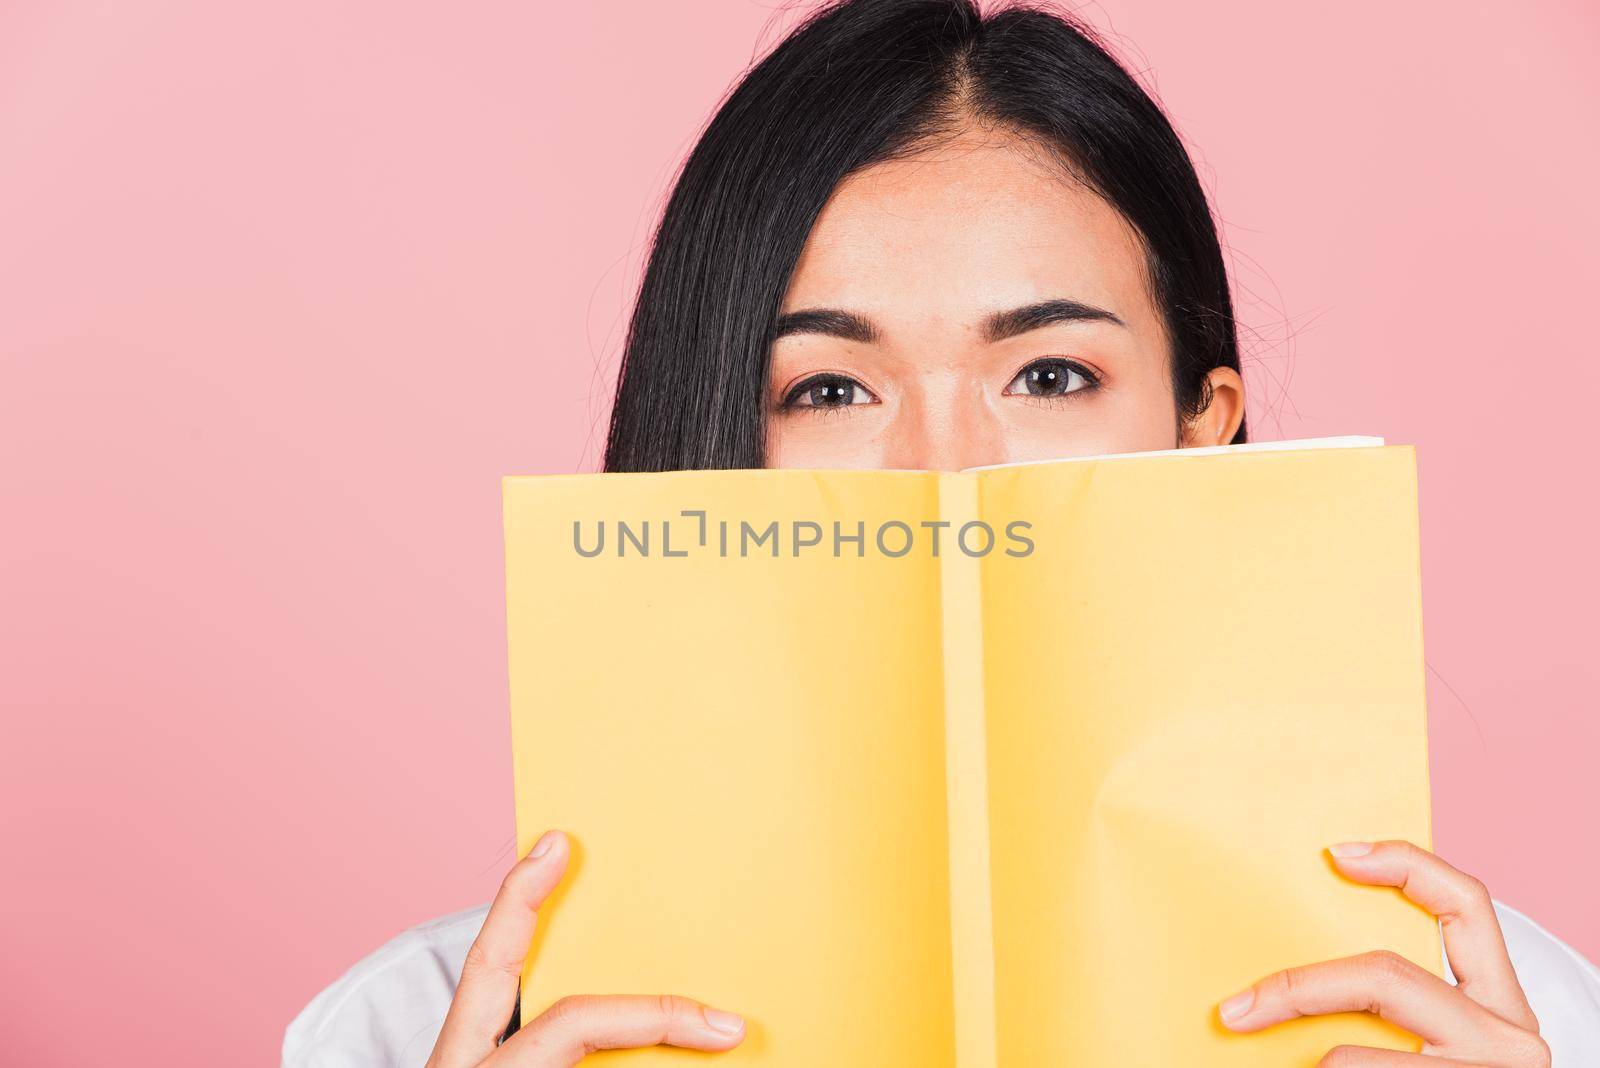 Portrait of beautiful Asian young woman teen smile covering her face with yellow book, female person hiding behind an open book show only eyes, studio shot isolated on pink background